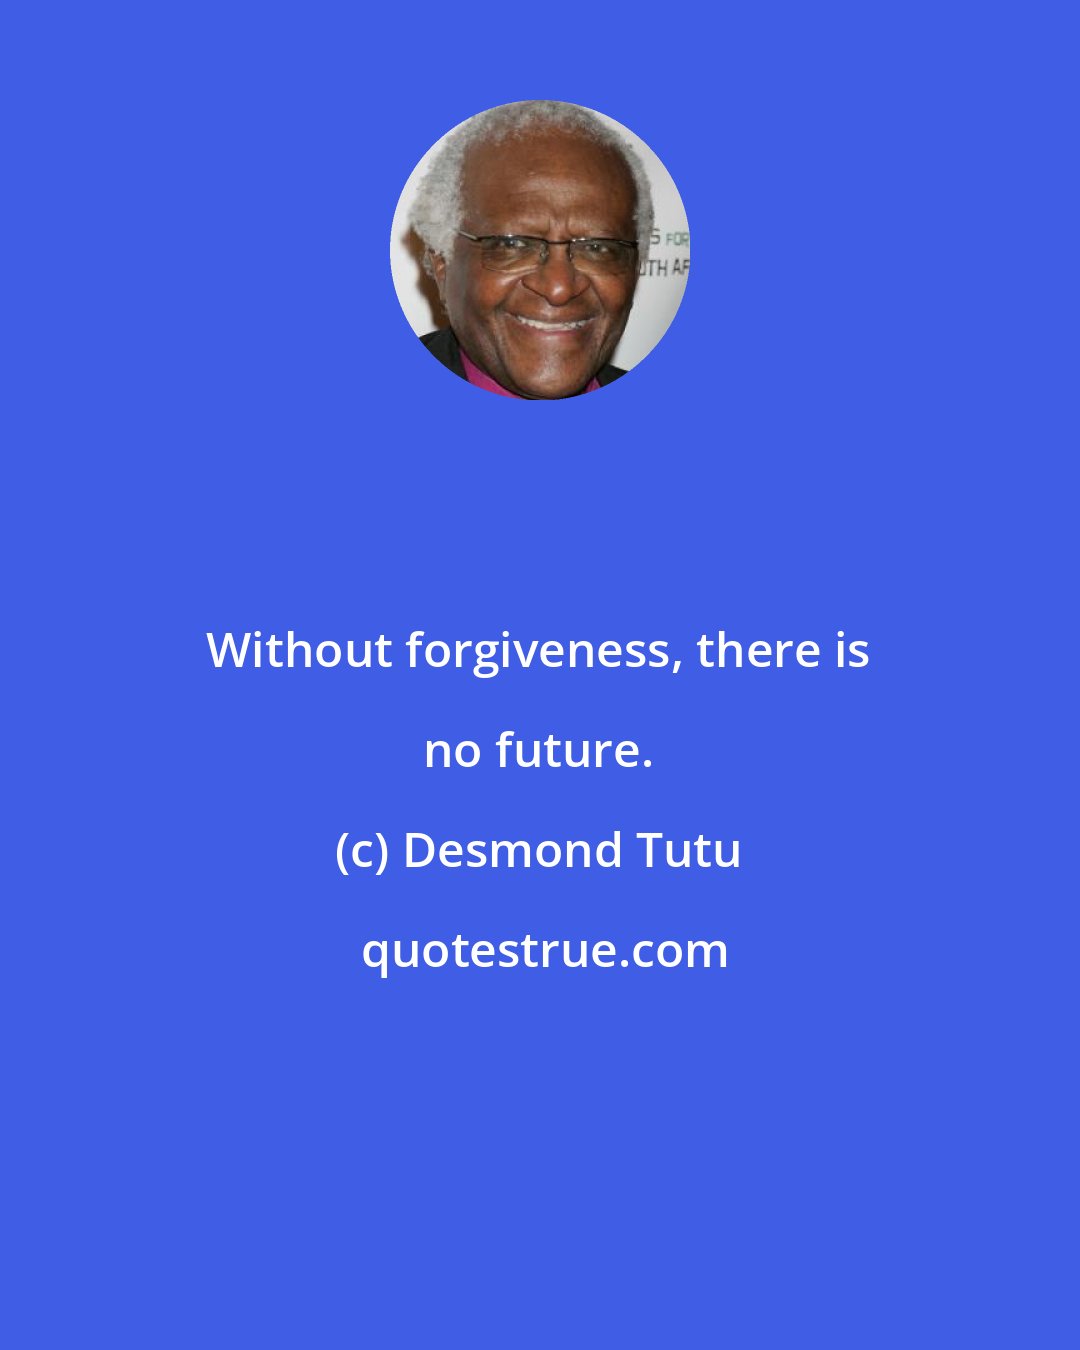 Desmond Tutu: Without forgiveness, there is no future.